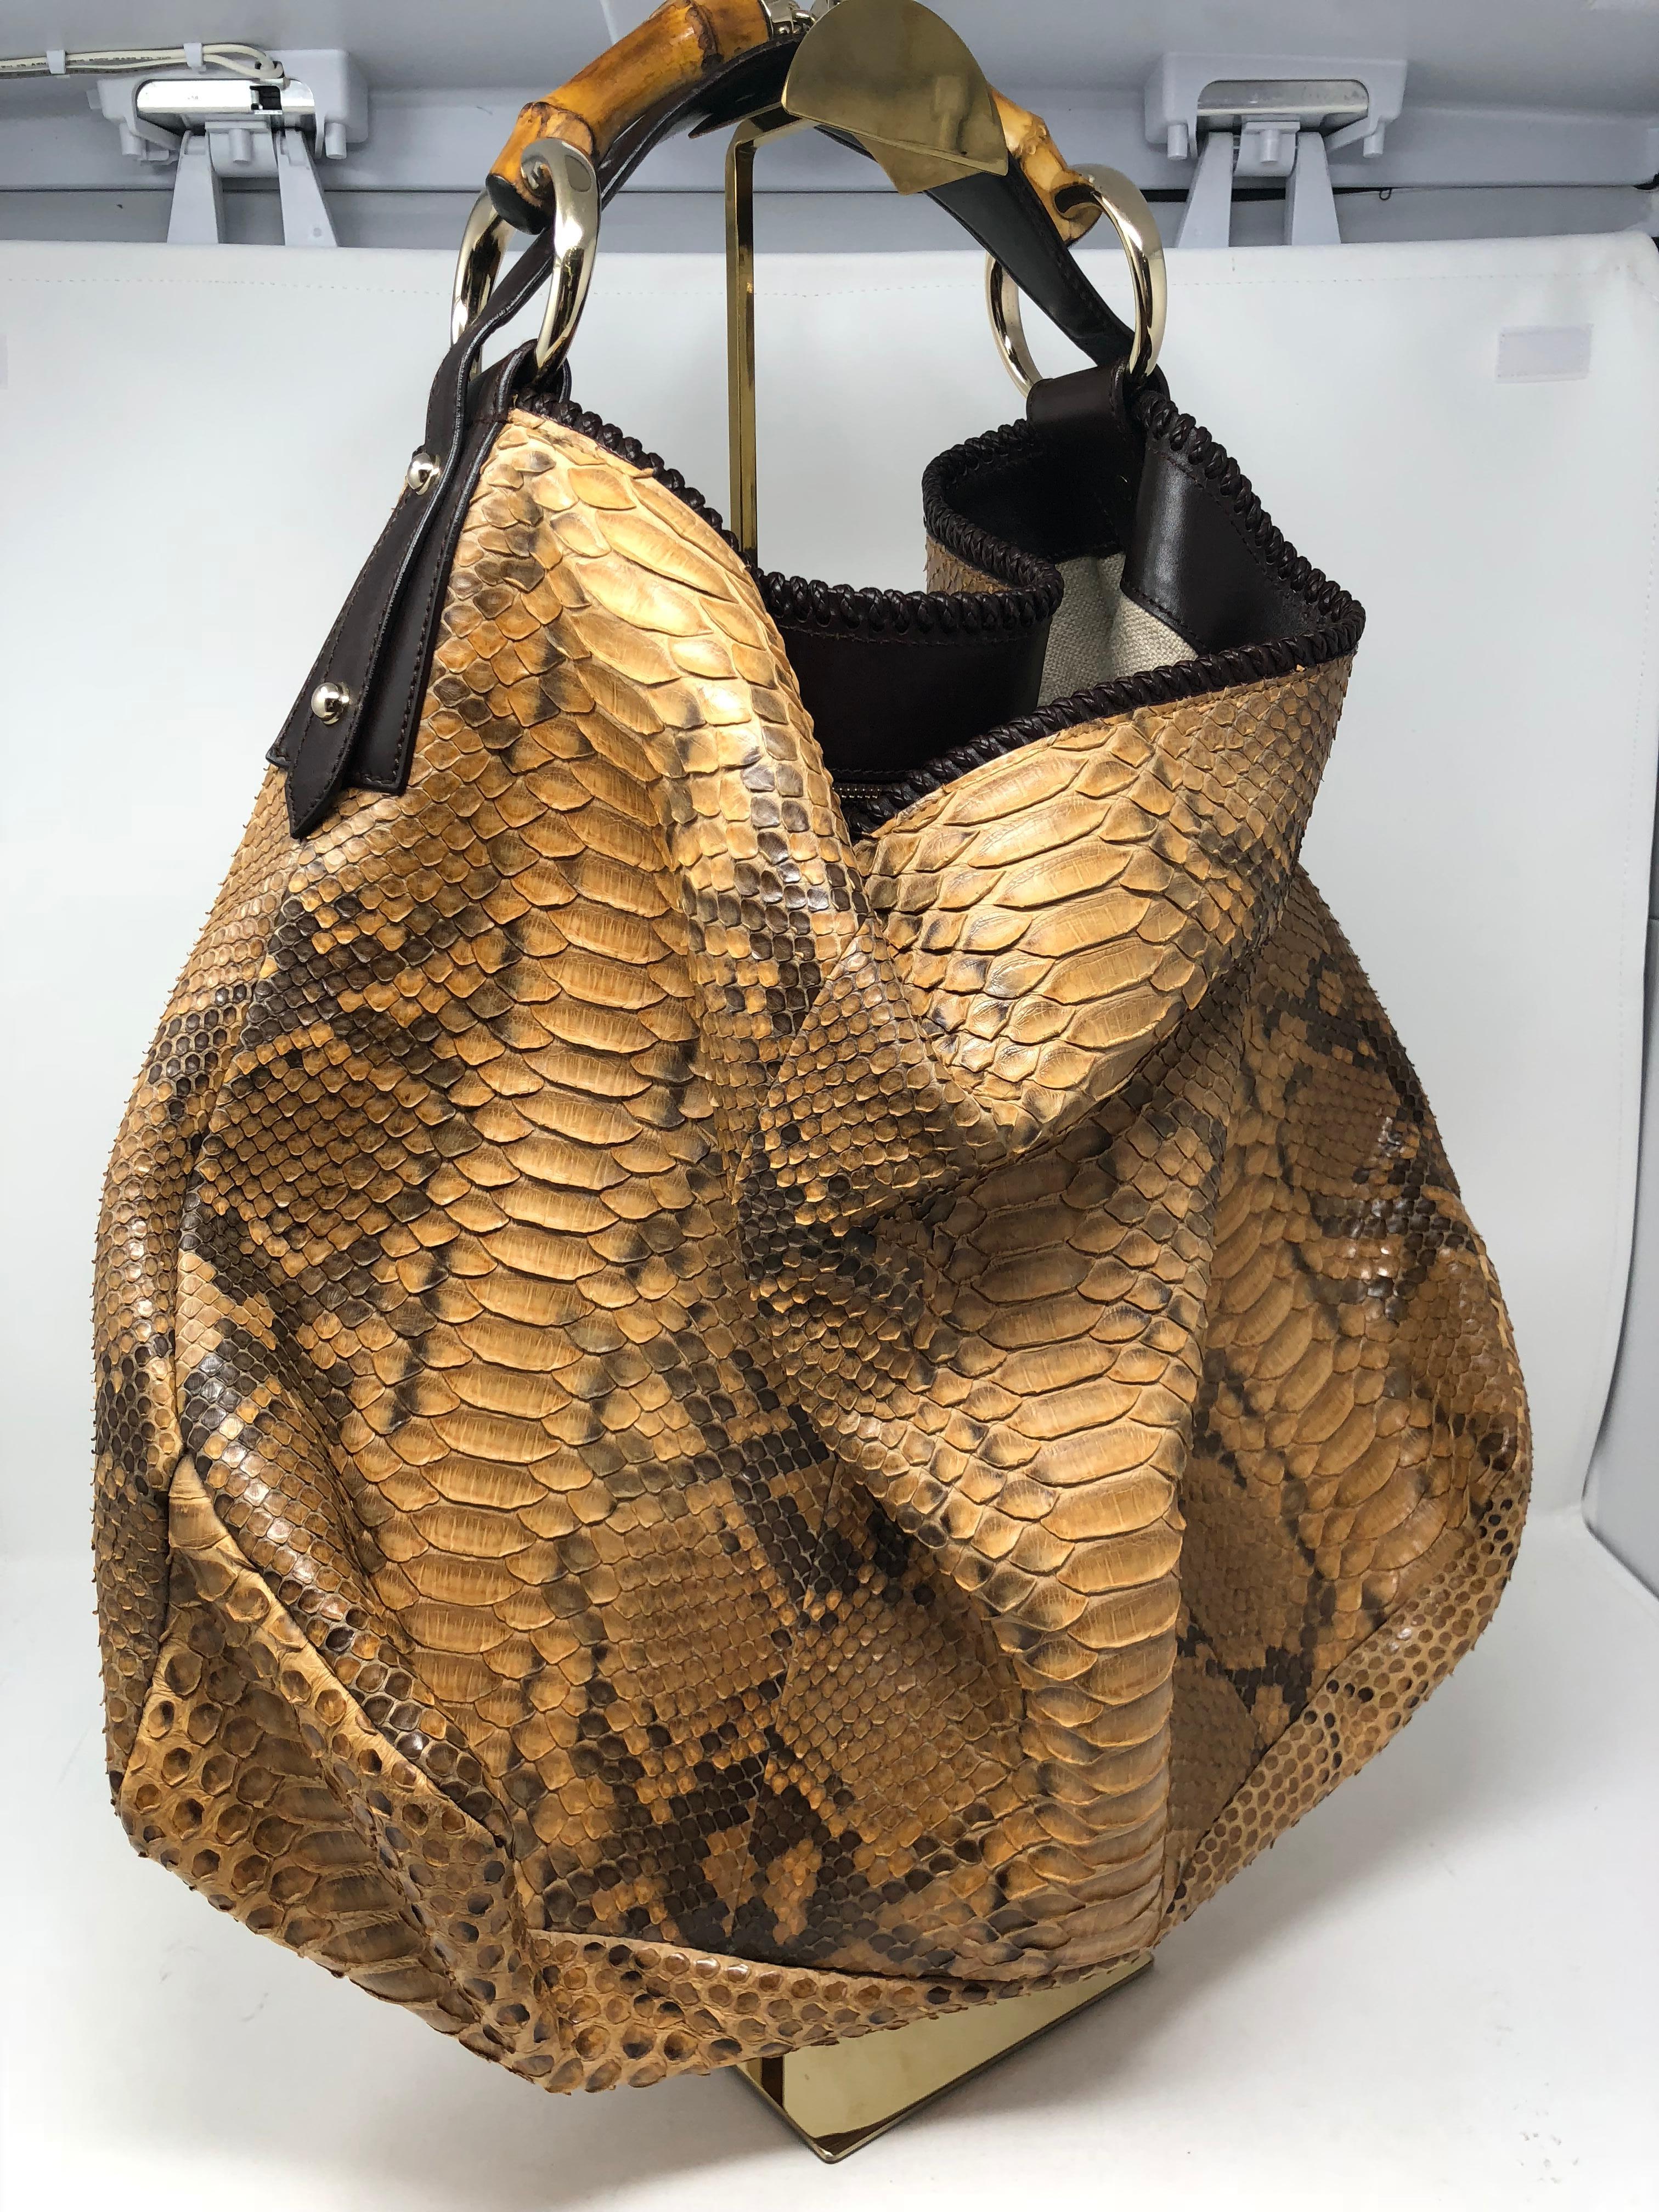 Gucci Python Hobo Bag. Rare Python Gucci with bamboo handle. Mint condition. Hardly any wear and clean inside. Collector's piece. Guaranteed authentic. 